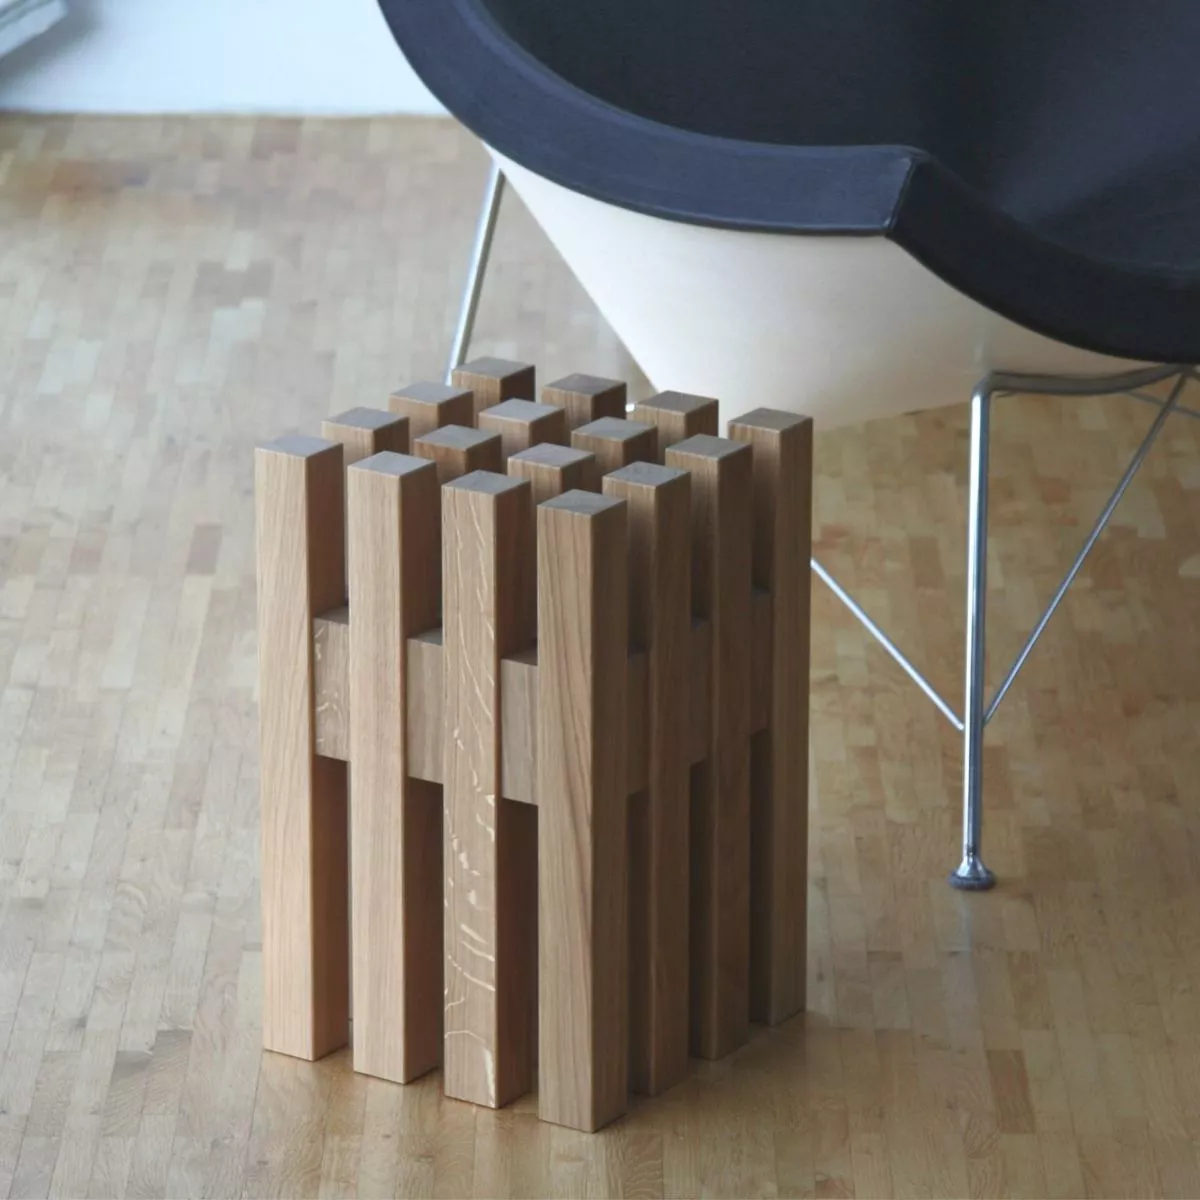 Small Design Stool / Side Table "Sixteen" made of Oak Wood